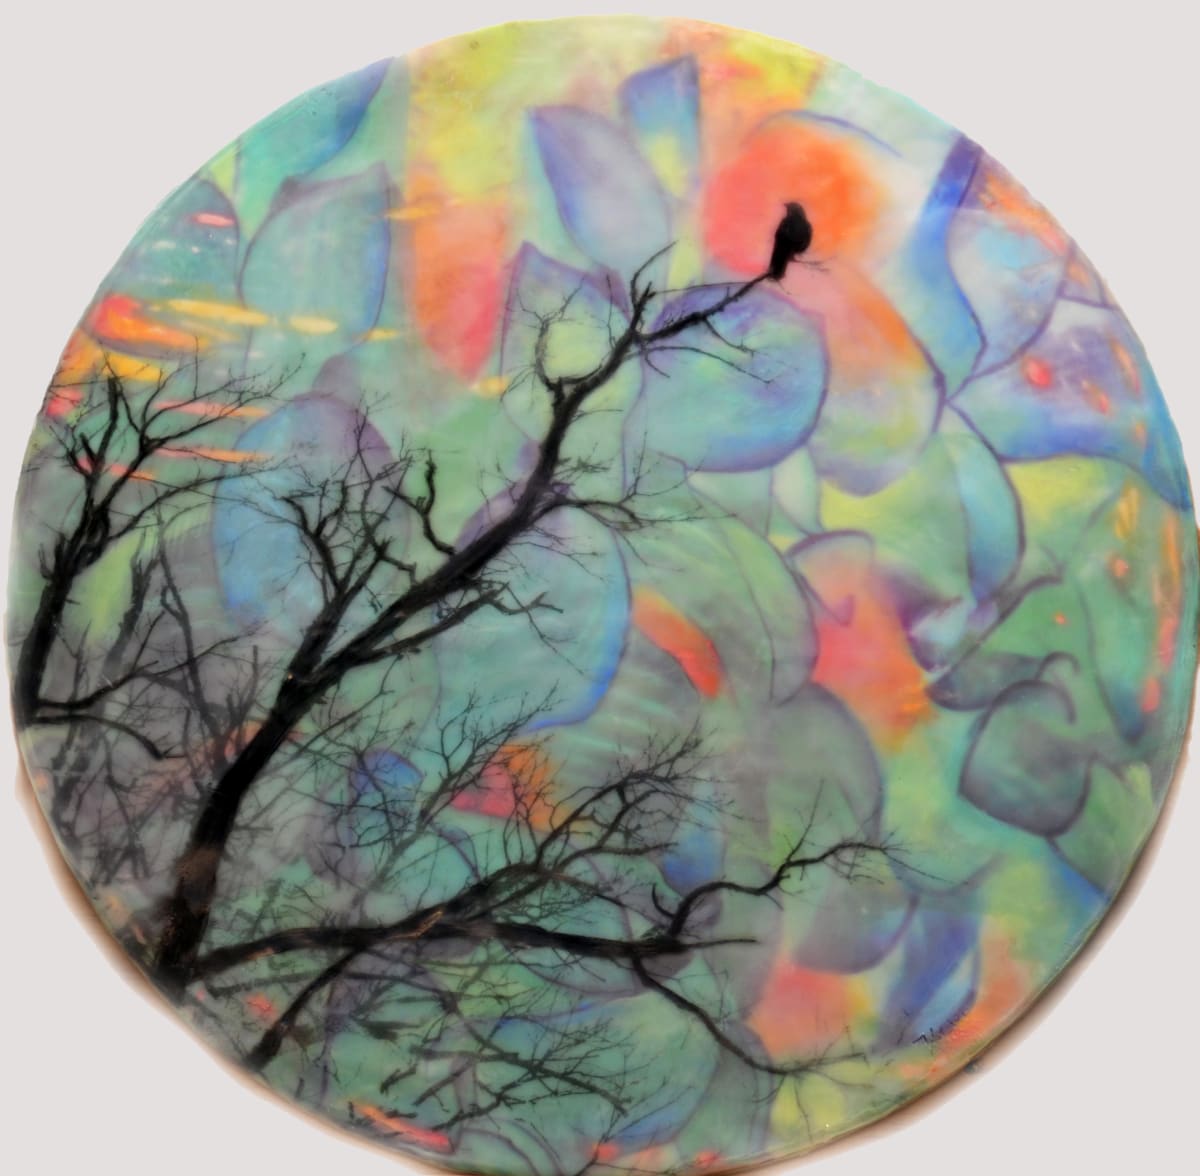 Moon Night  Image: The moon casts a magical light that turns ordinary into extraordinary.  This artwork was created by torch fusing and layering clear encaustic medium, encaustic paints, oil pastels and by burnishing digitally edited images of tulip leaves and a bird in a tree.  
